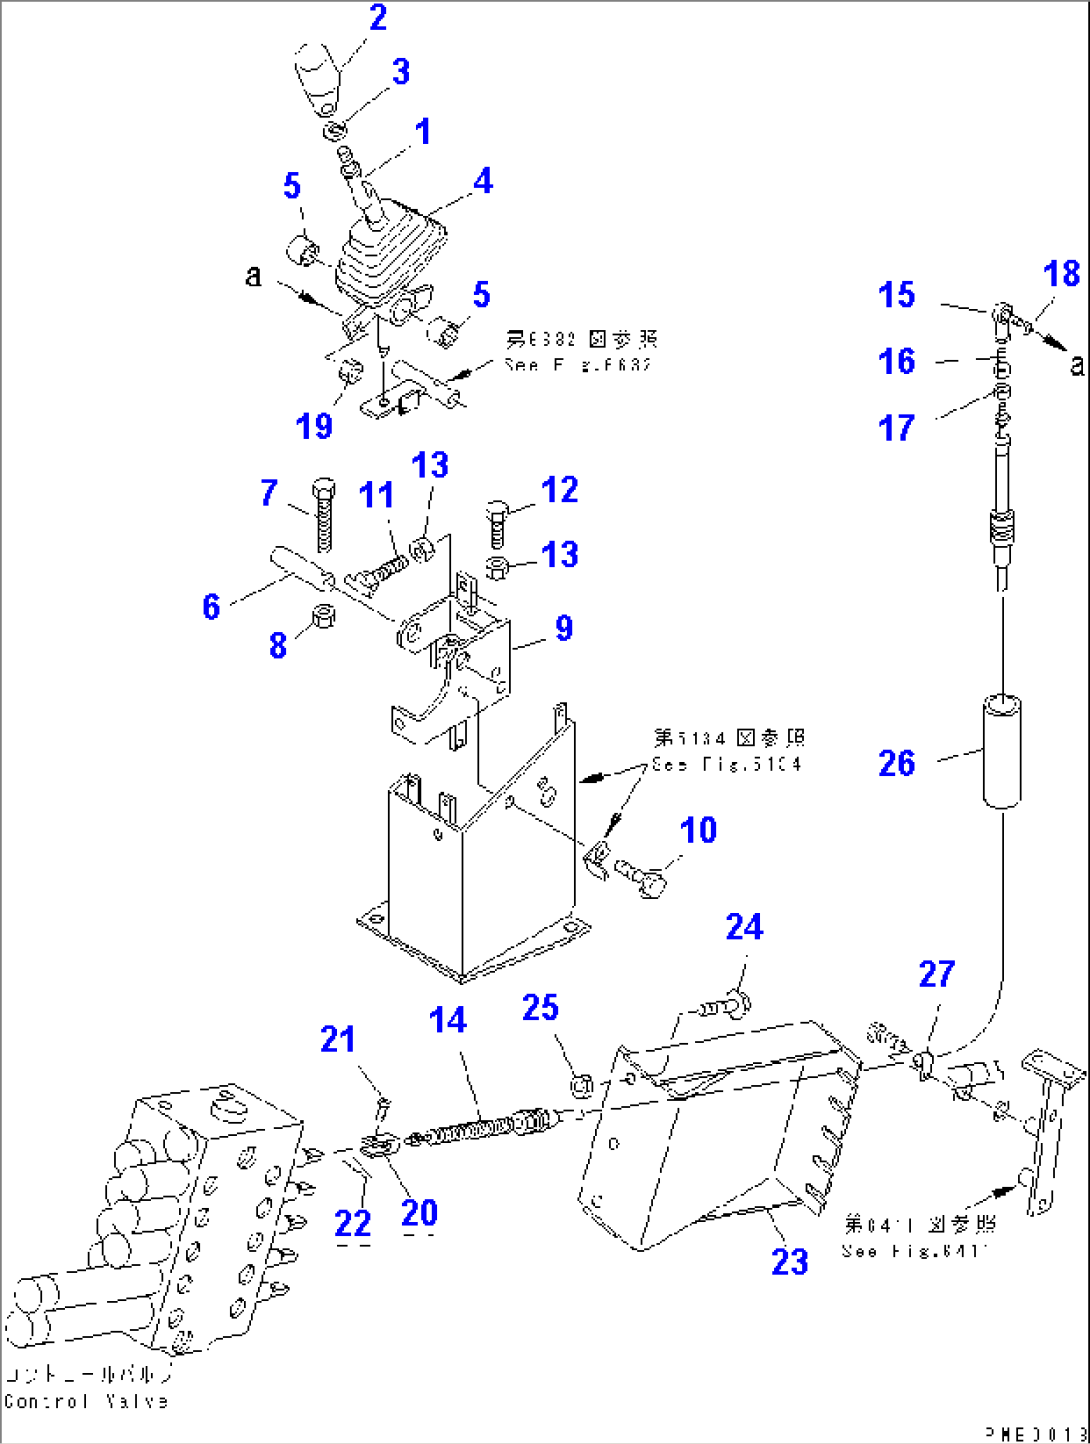 FRONT ATTACHMENT CONTROL LEVER AND LINKAGE (WITH 5-SPOOL CONTROL VALVE)(#50001-)